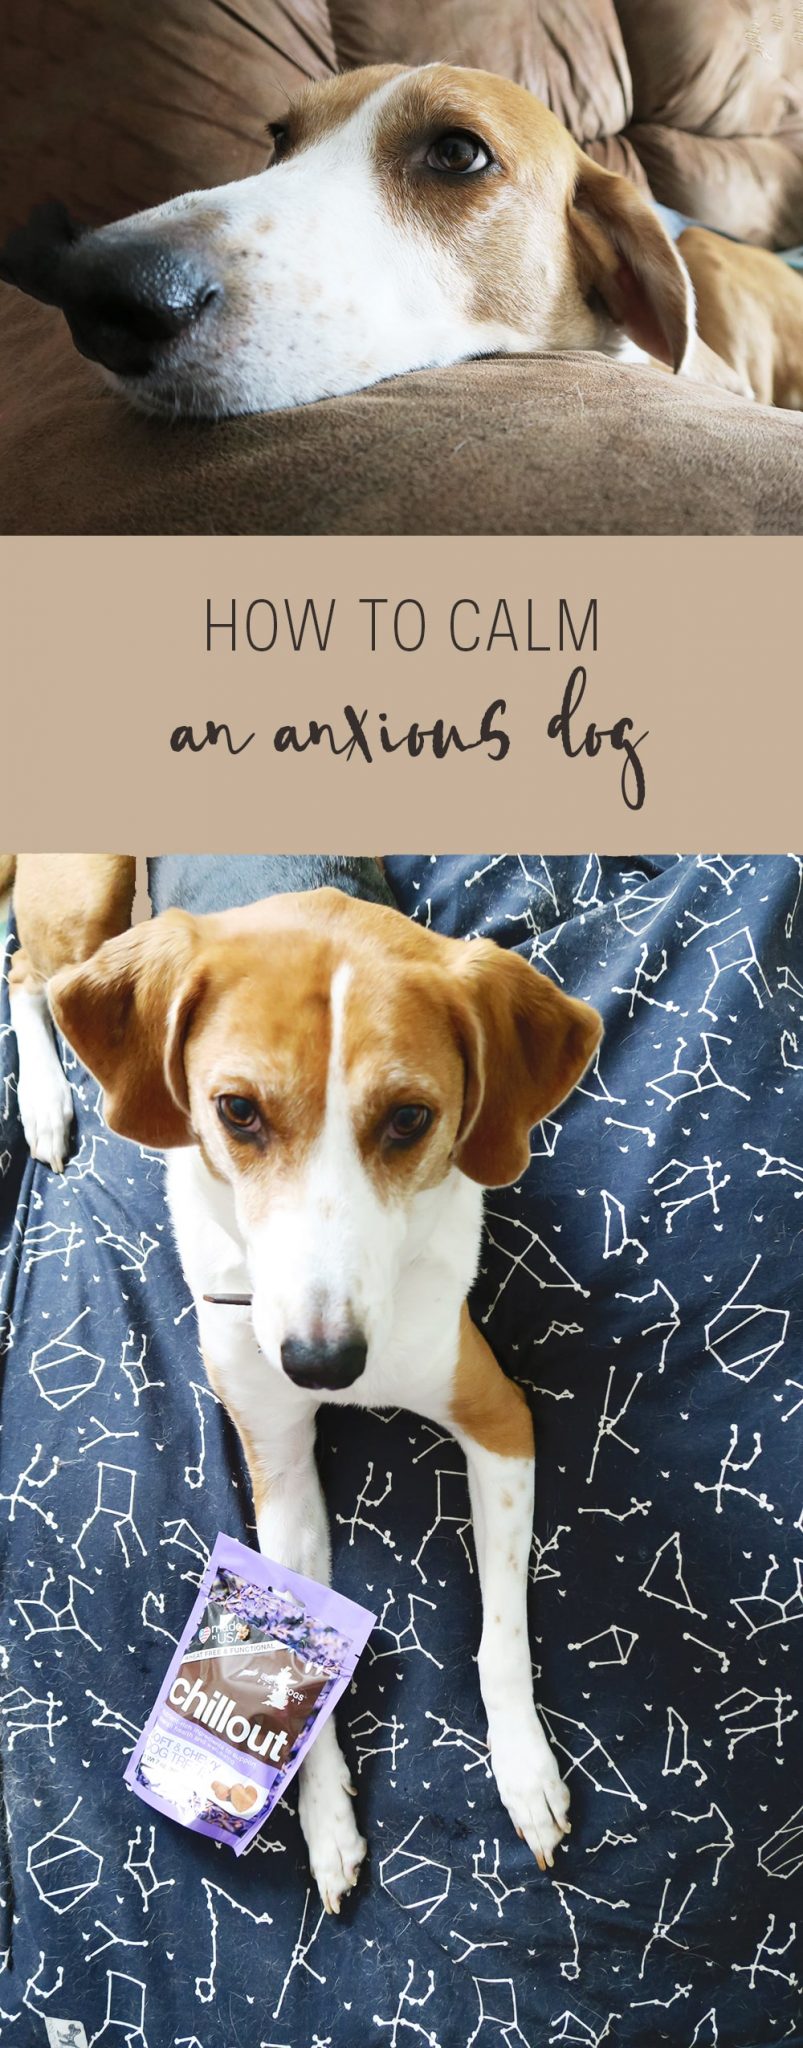 If your dog suffers from anxiety from thunderstorms, fireworks, or being apart - you can ease their stress with this guide on how to calm an anxious dog.